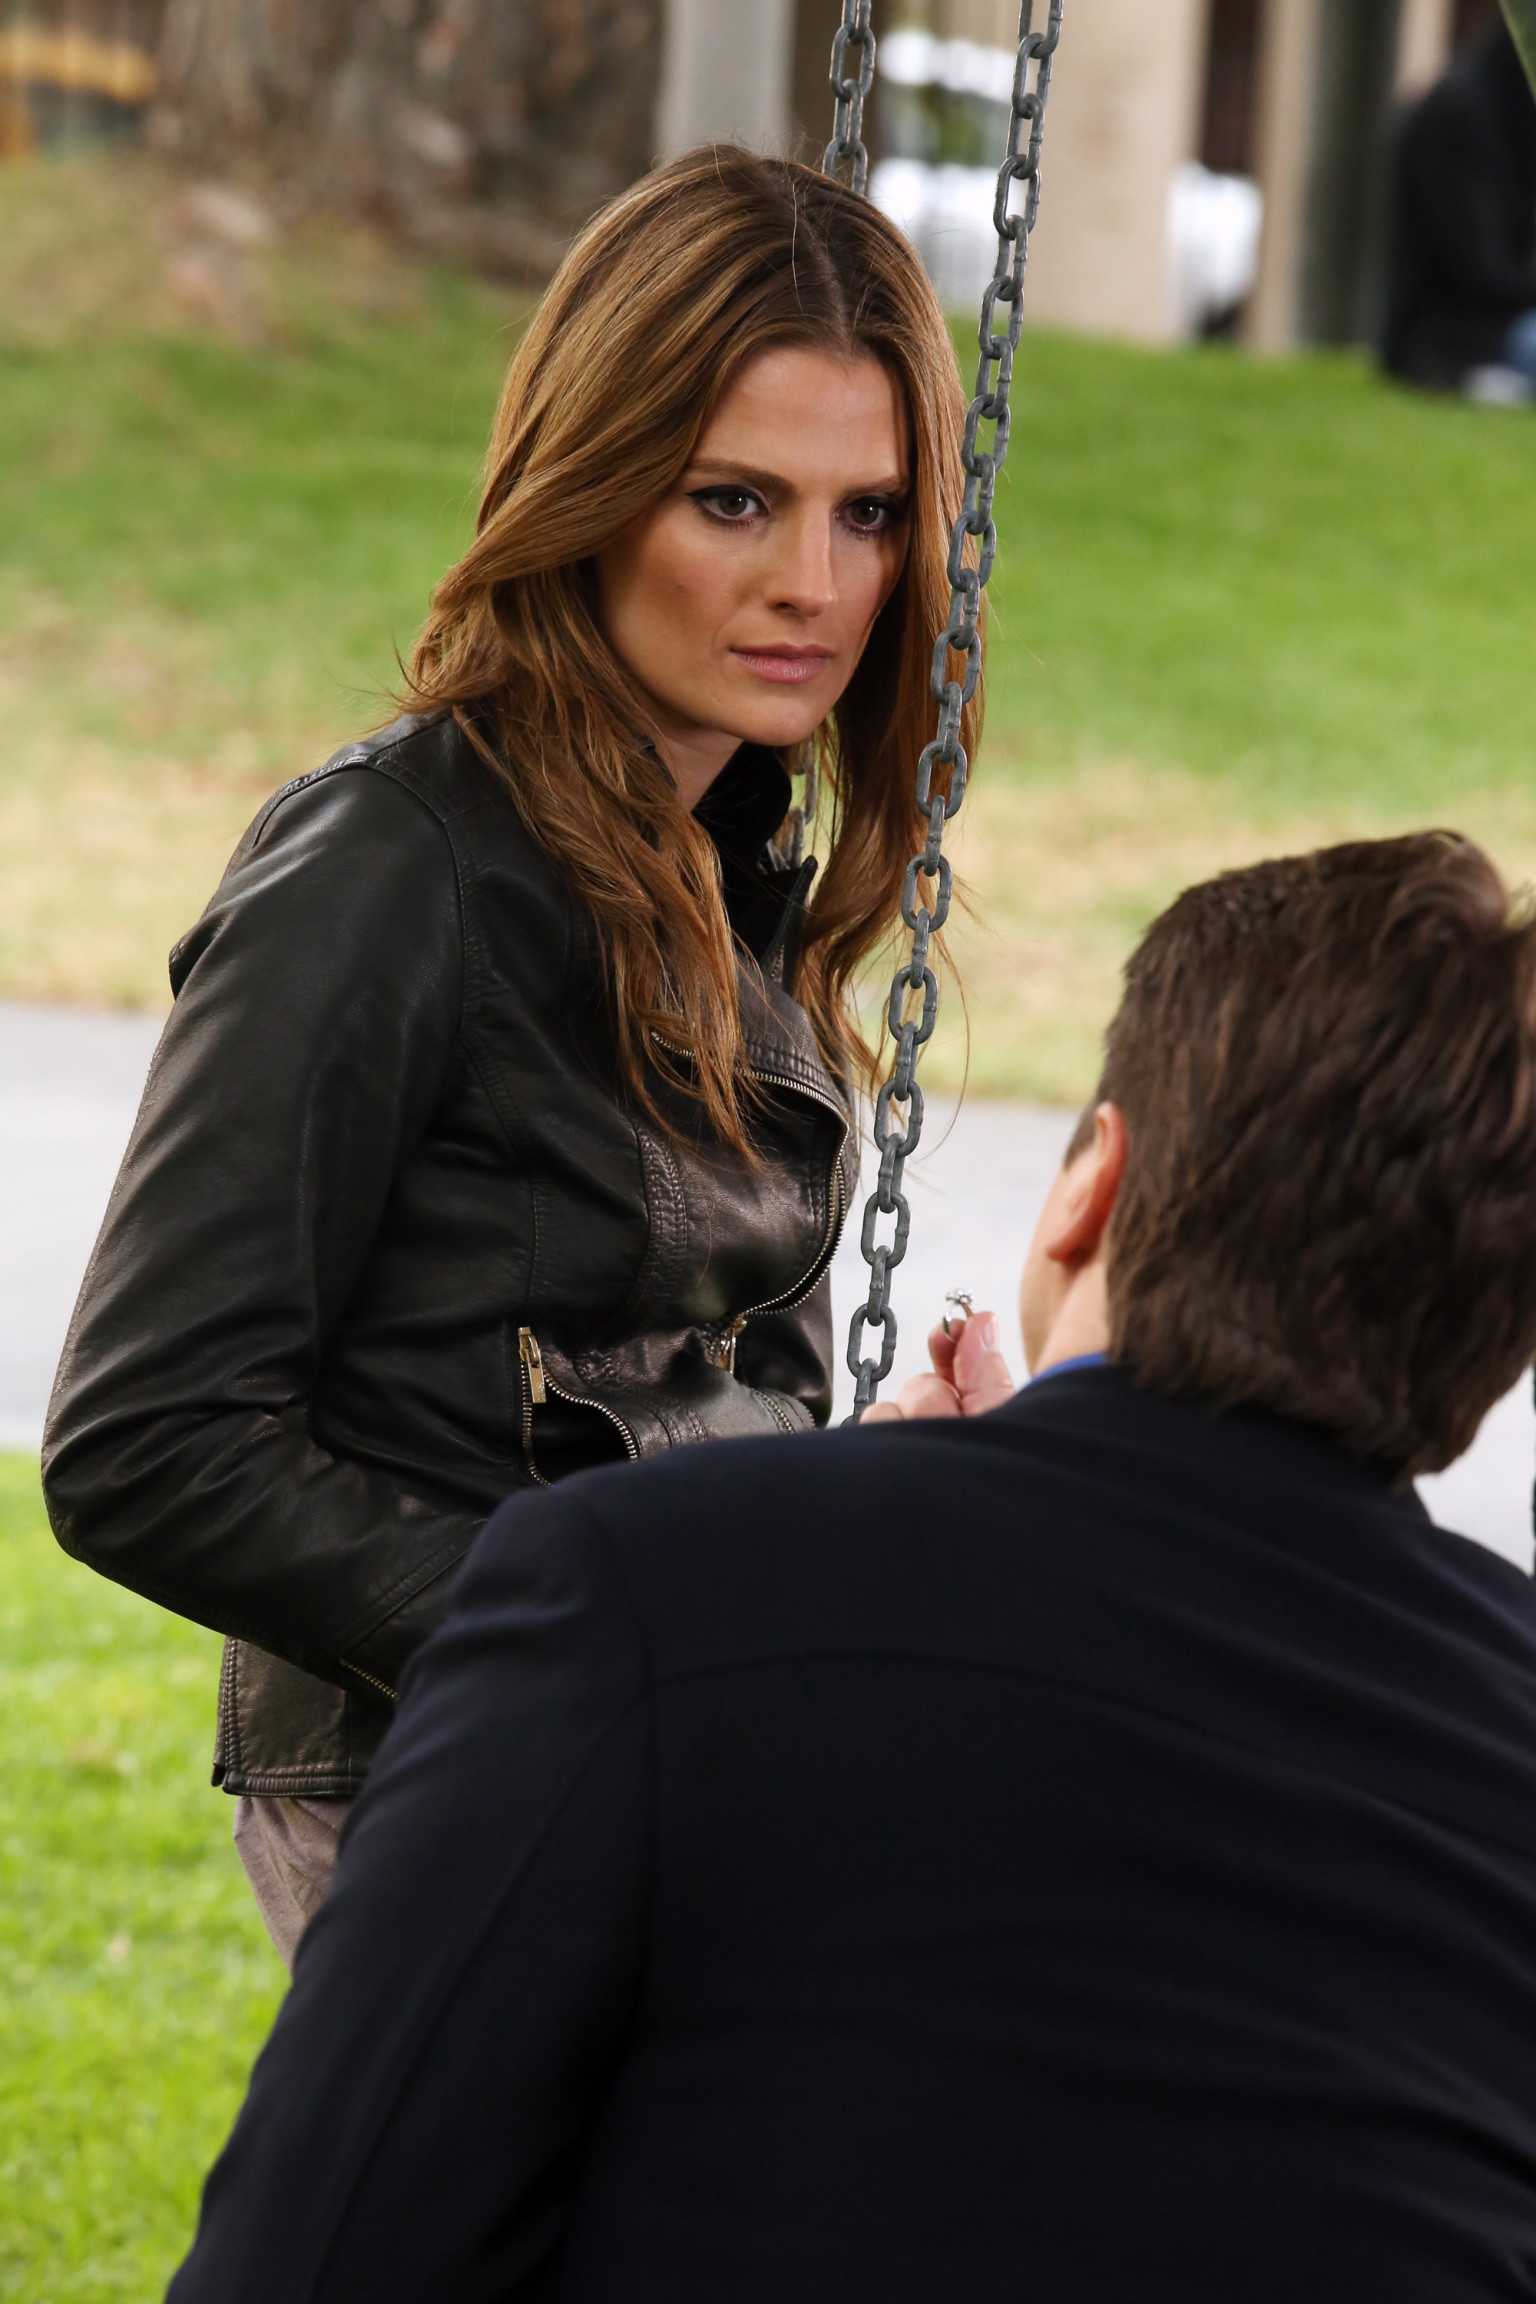 will-castle-and-beckett-get-engaged-major-castle-season-6-spoiler